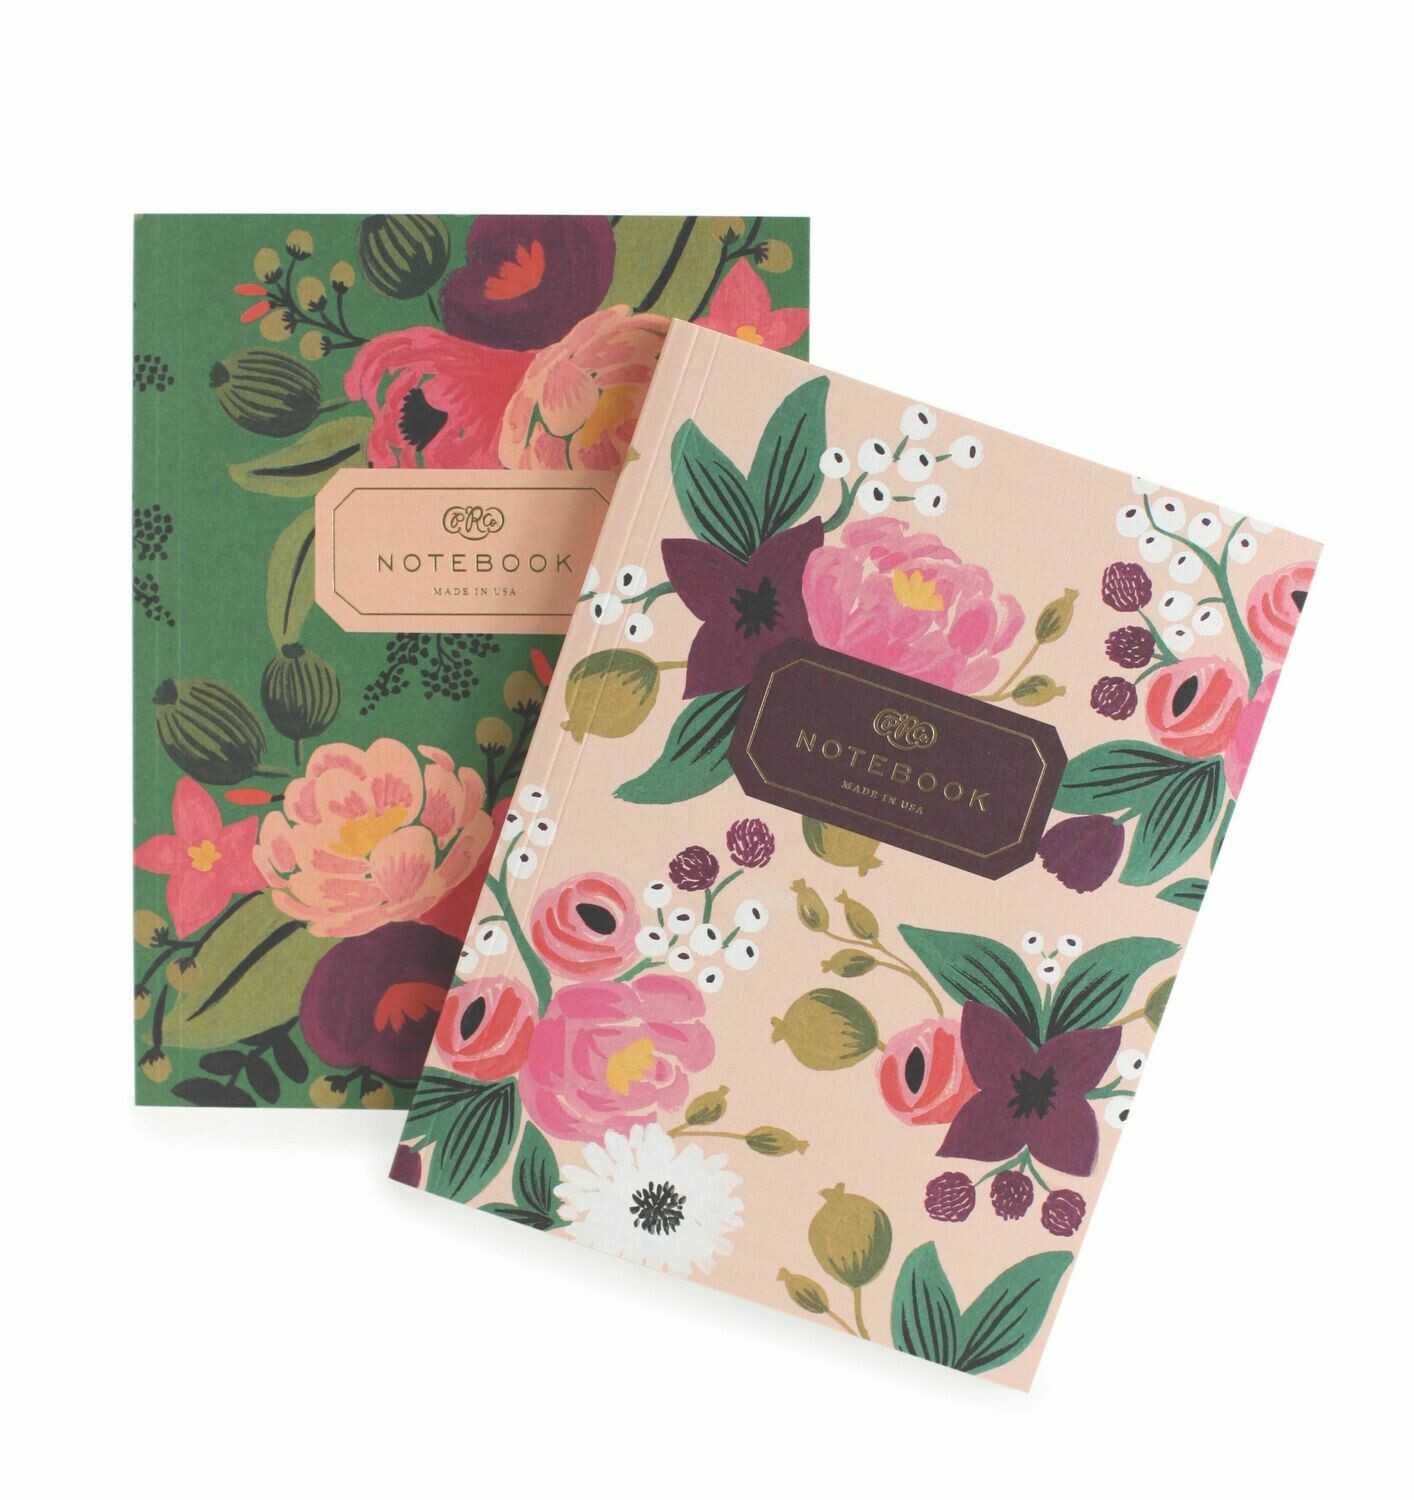 Vintage Blossoms Notebooks - Set of 2 - Rifle Paper Co. RPC20